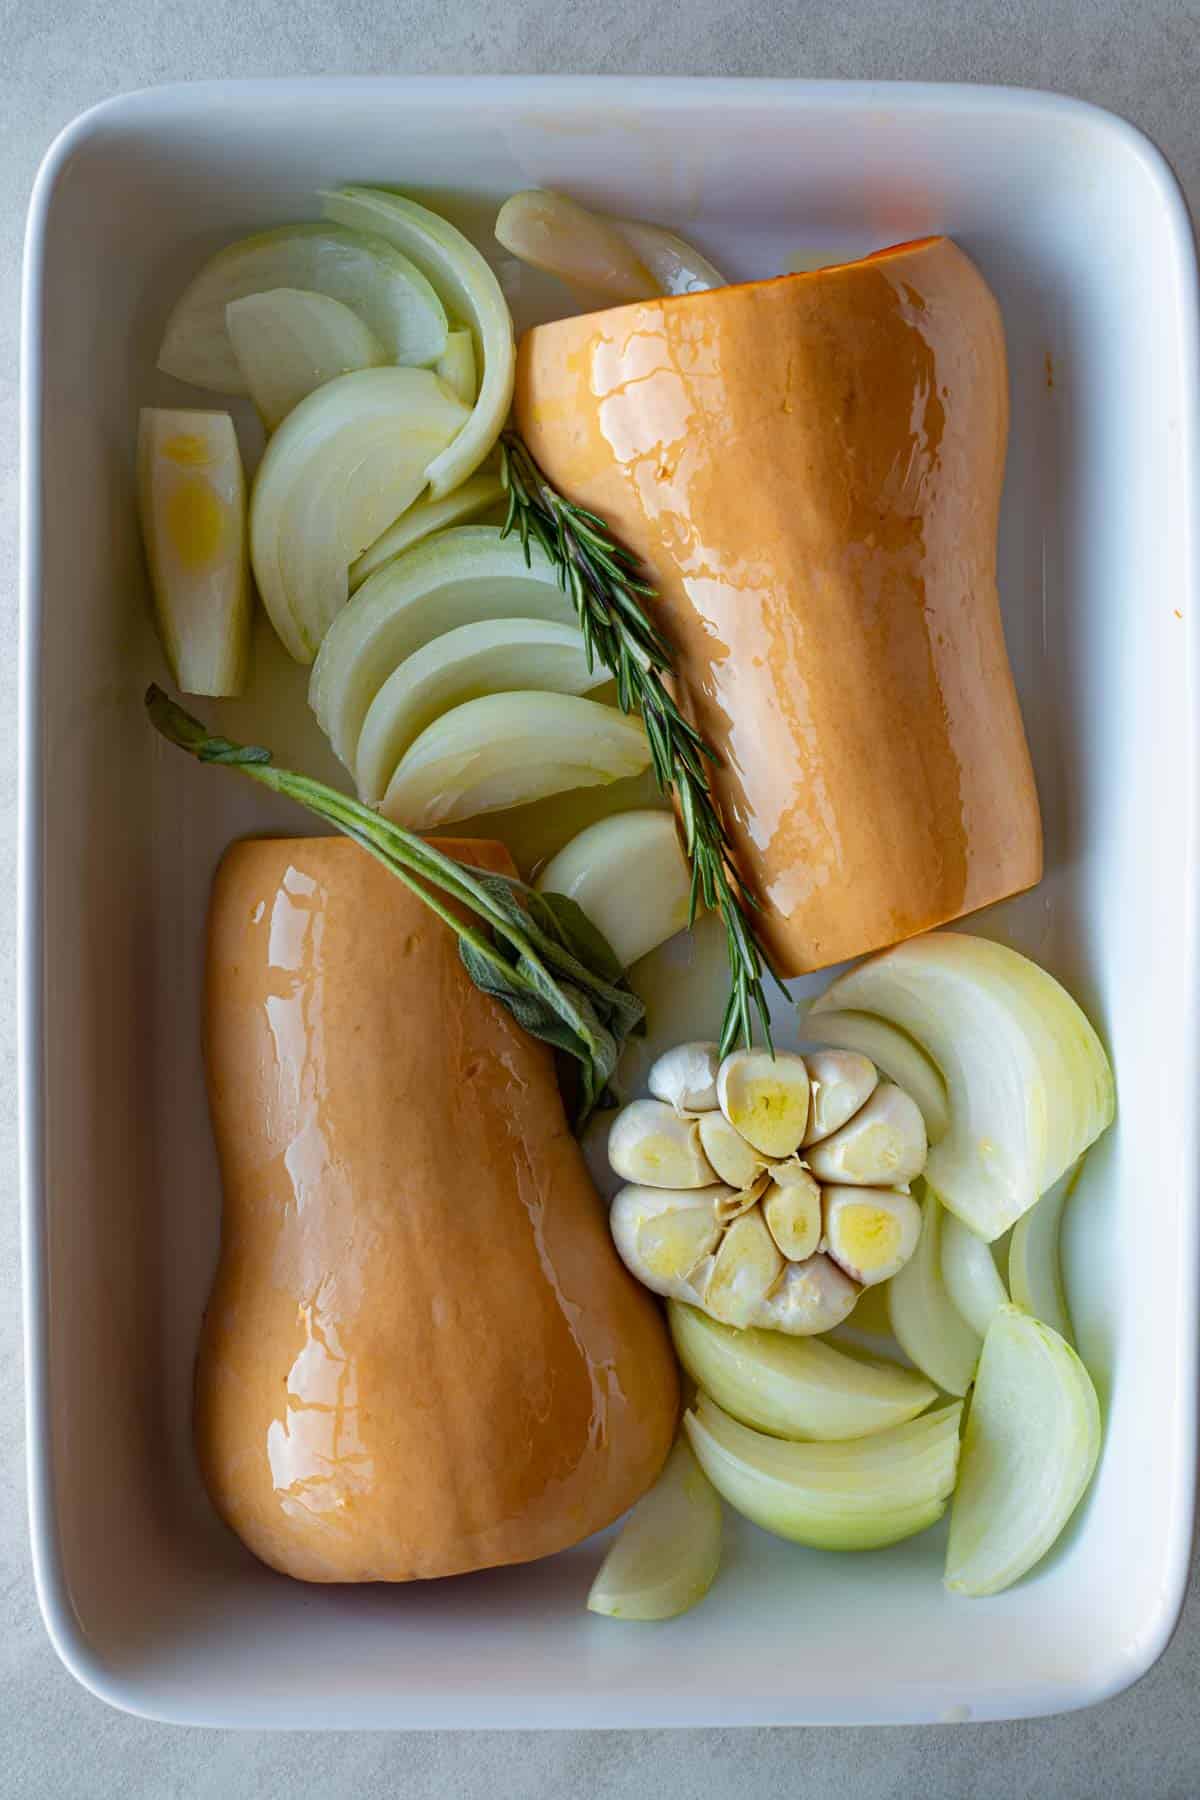 Halved butternut squash, flesh side down, with sliced onion, one head of garlic, and fresh sprigs of rosemary and sage in a white baking dish.